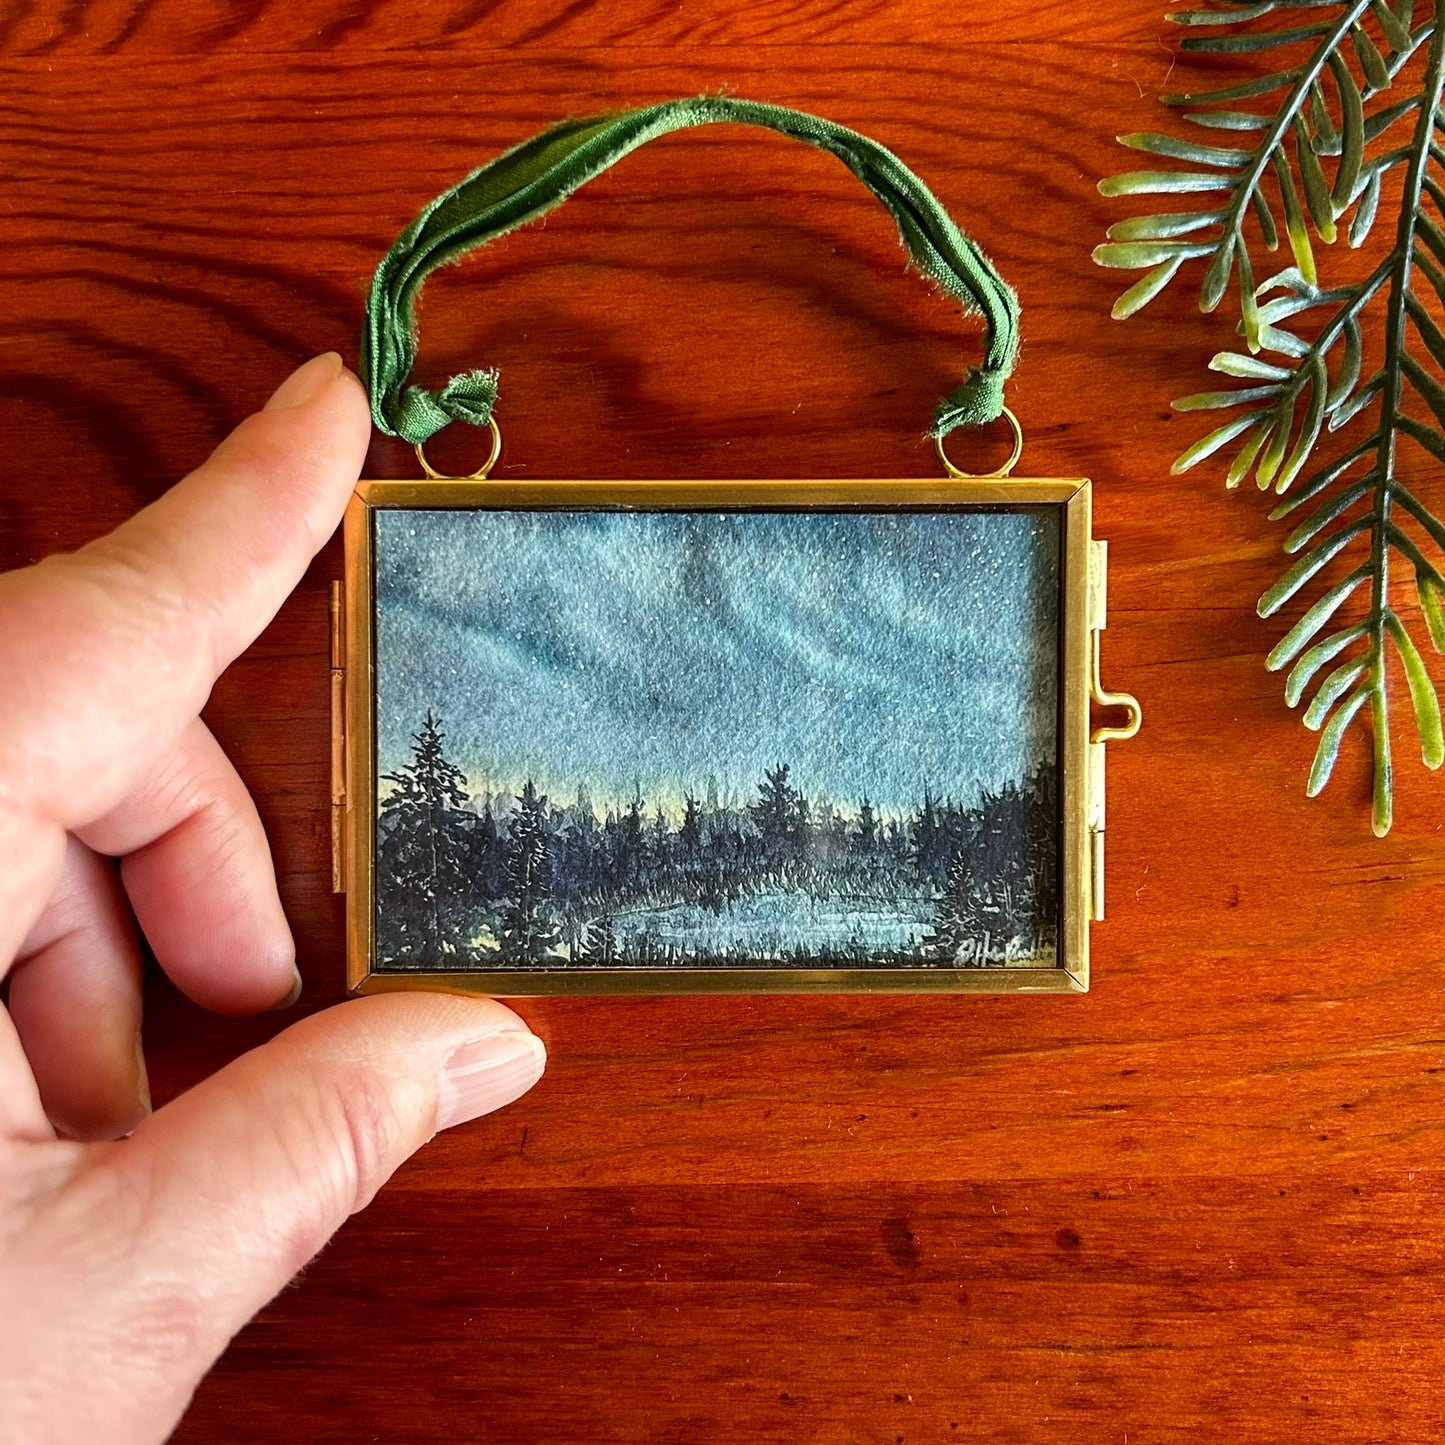 '23 Among the Pines Ornament